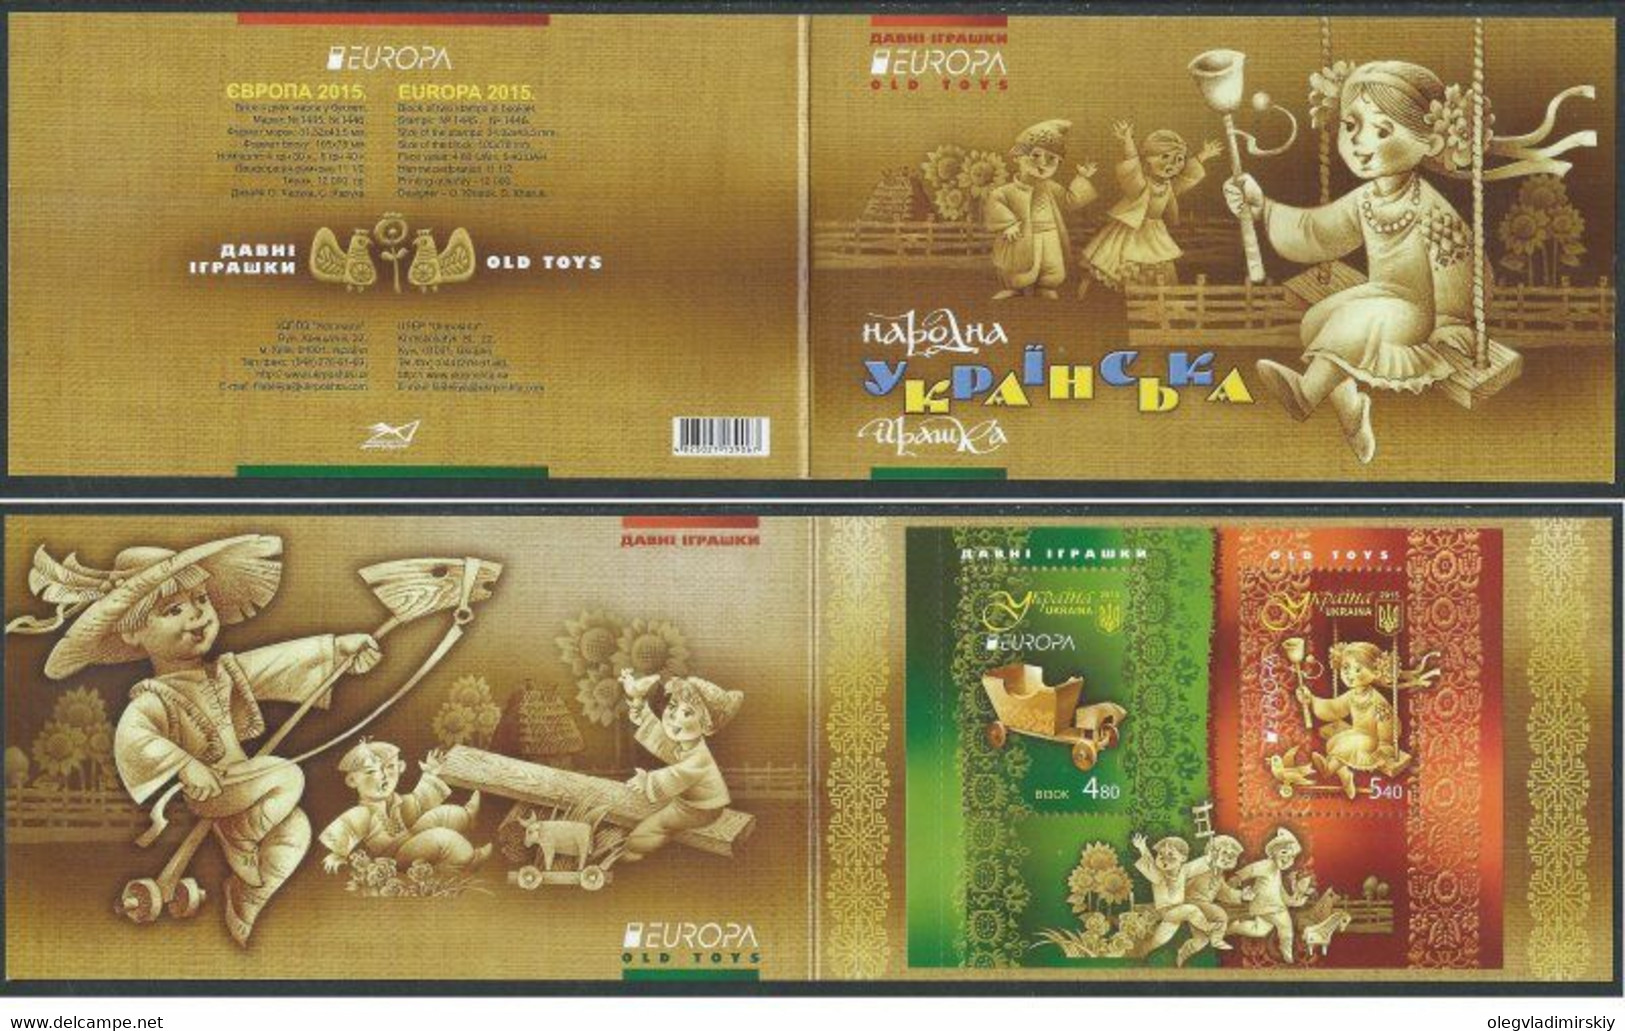 Ukraine 2015 Europa CEPT Old Toys Limited Edition Block In Booklet - Puppen